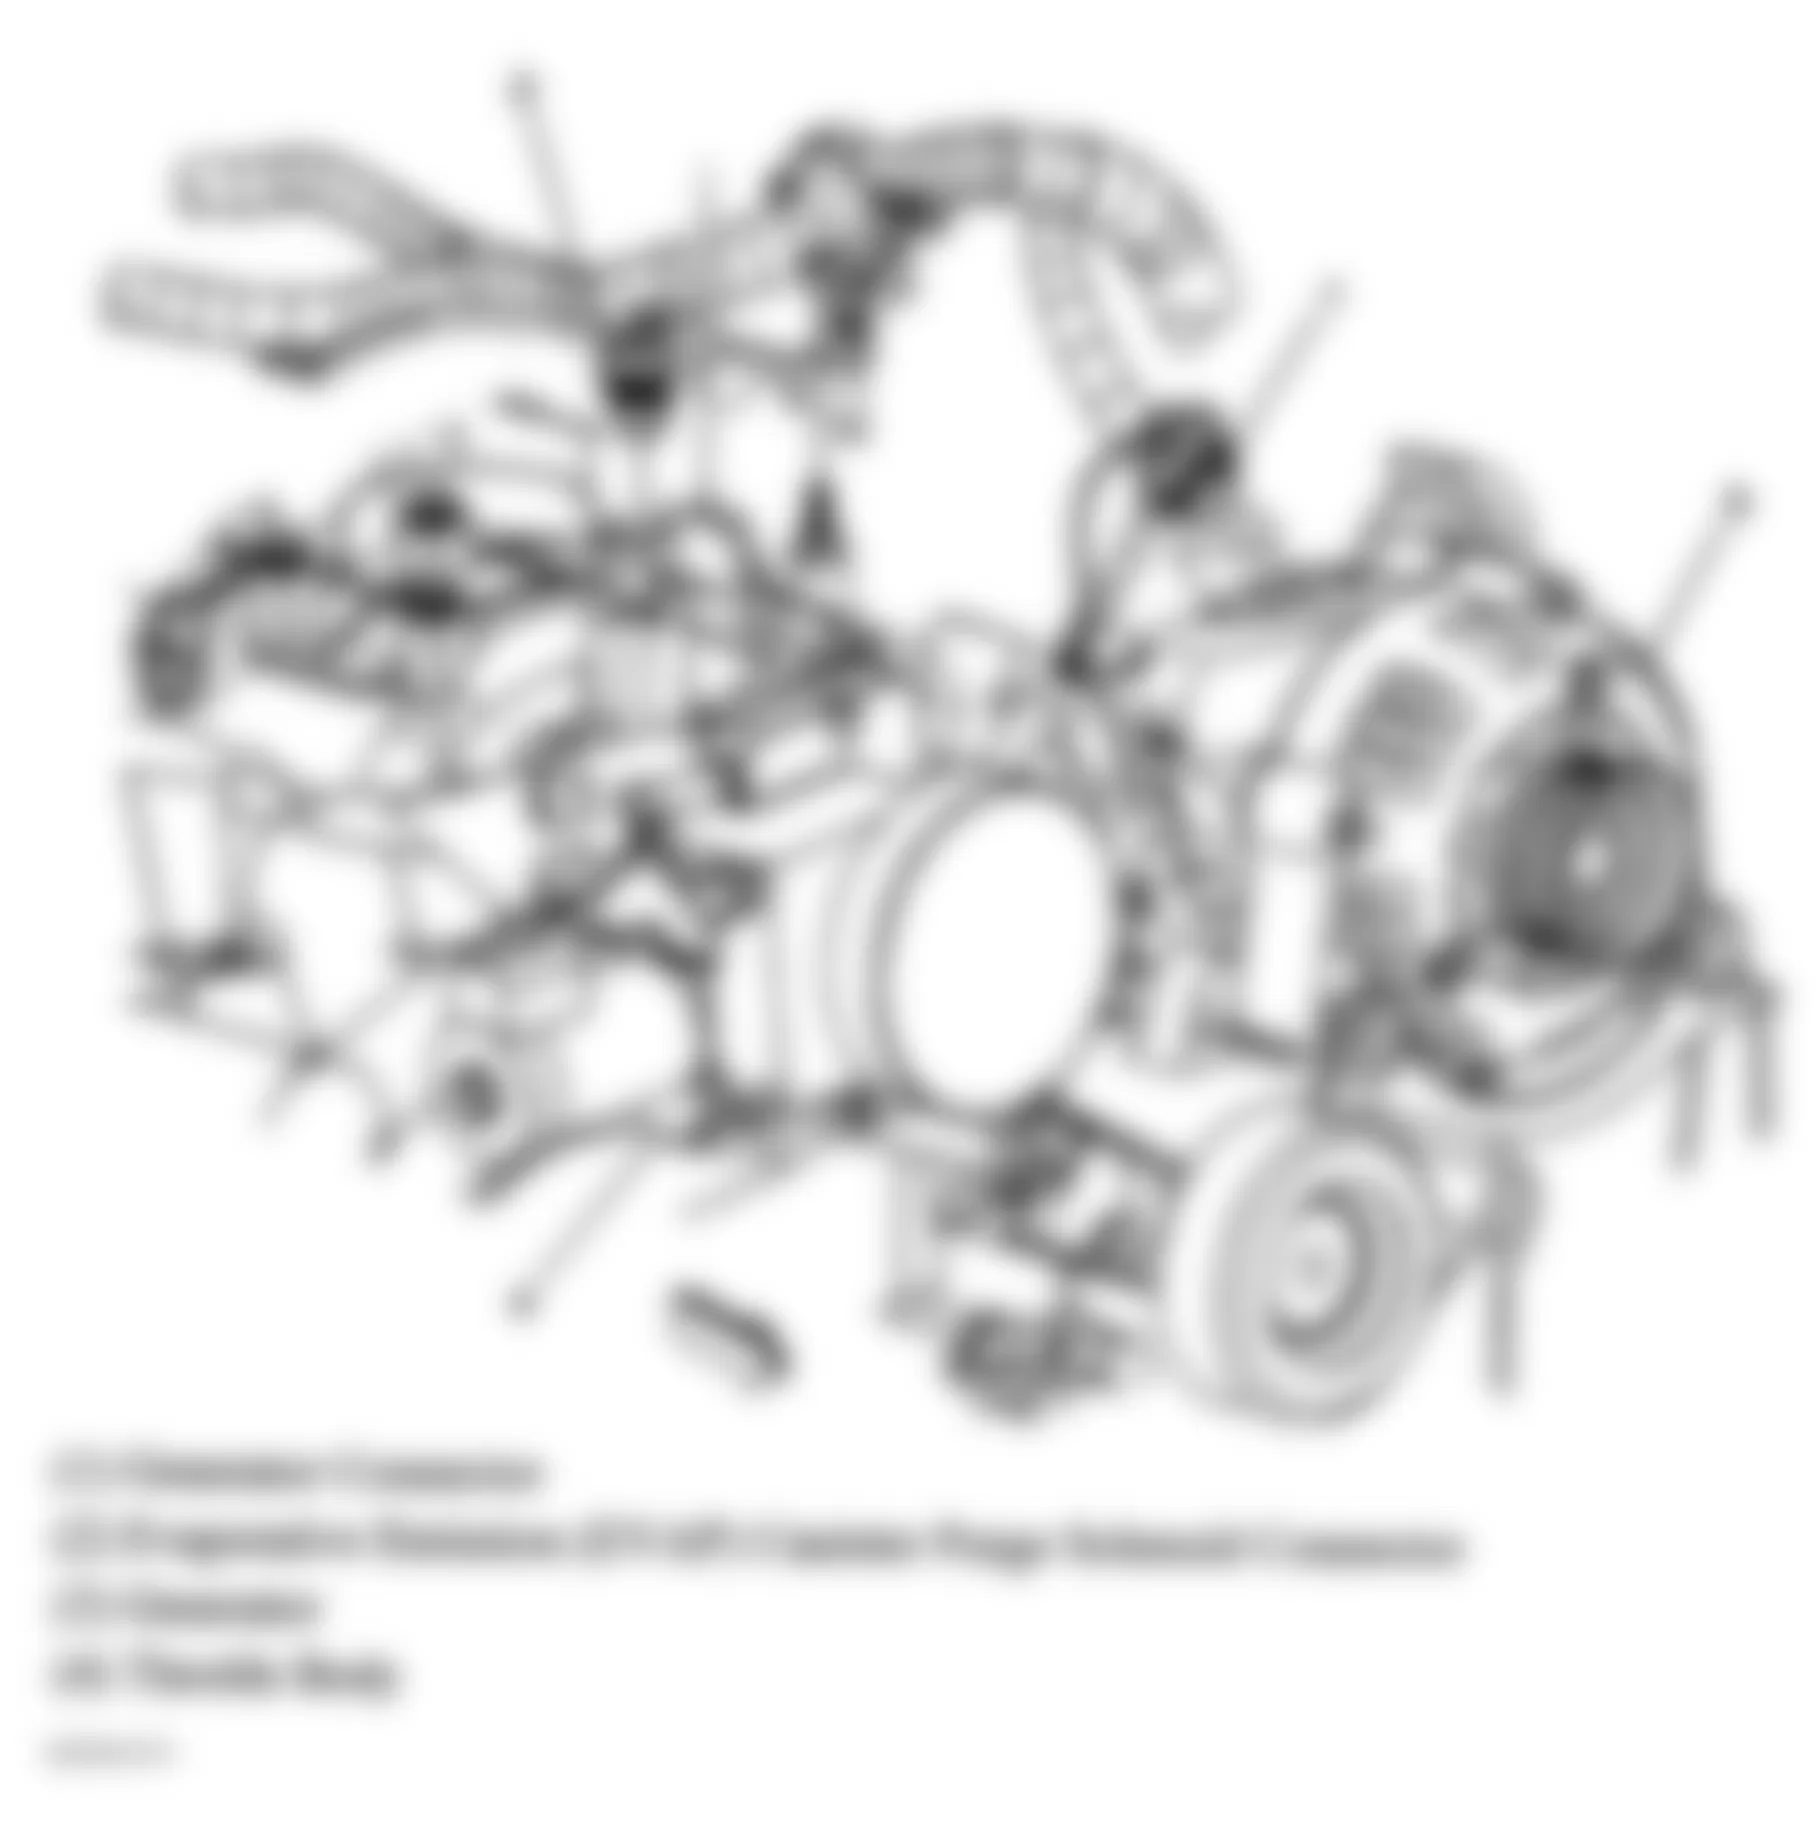 GMC Envoy 2005 - Component Locations -  Top Front Of Engine (5.3L)